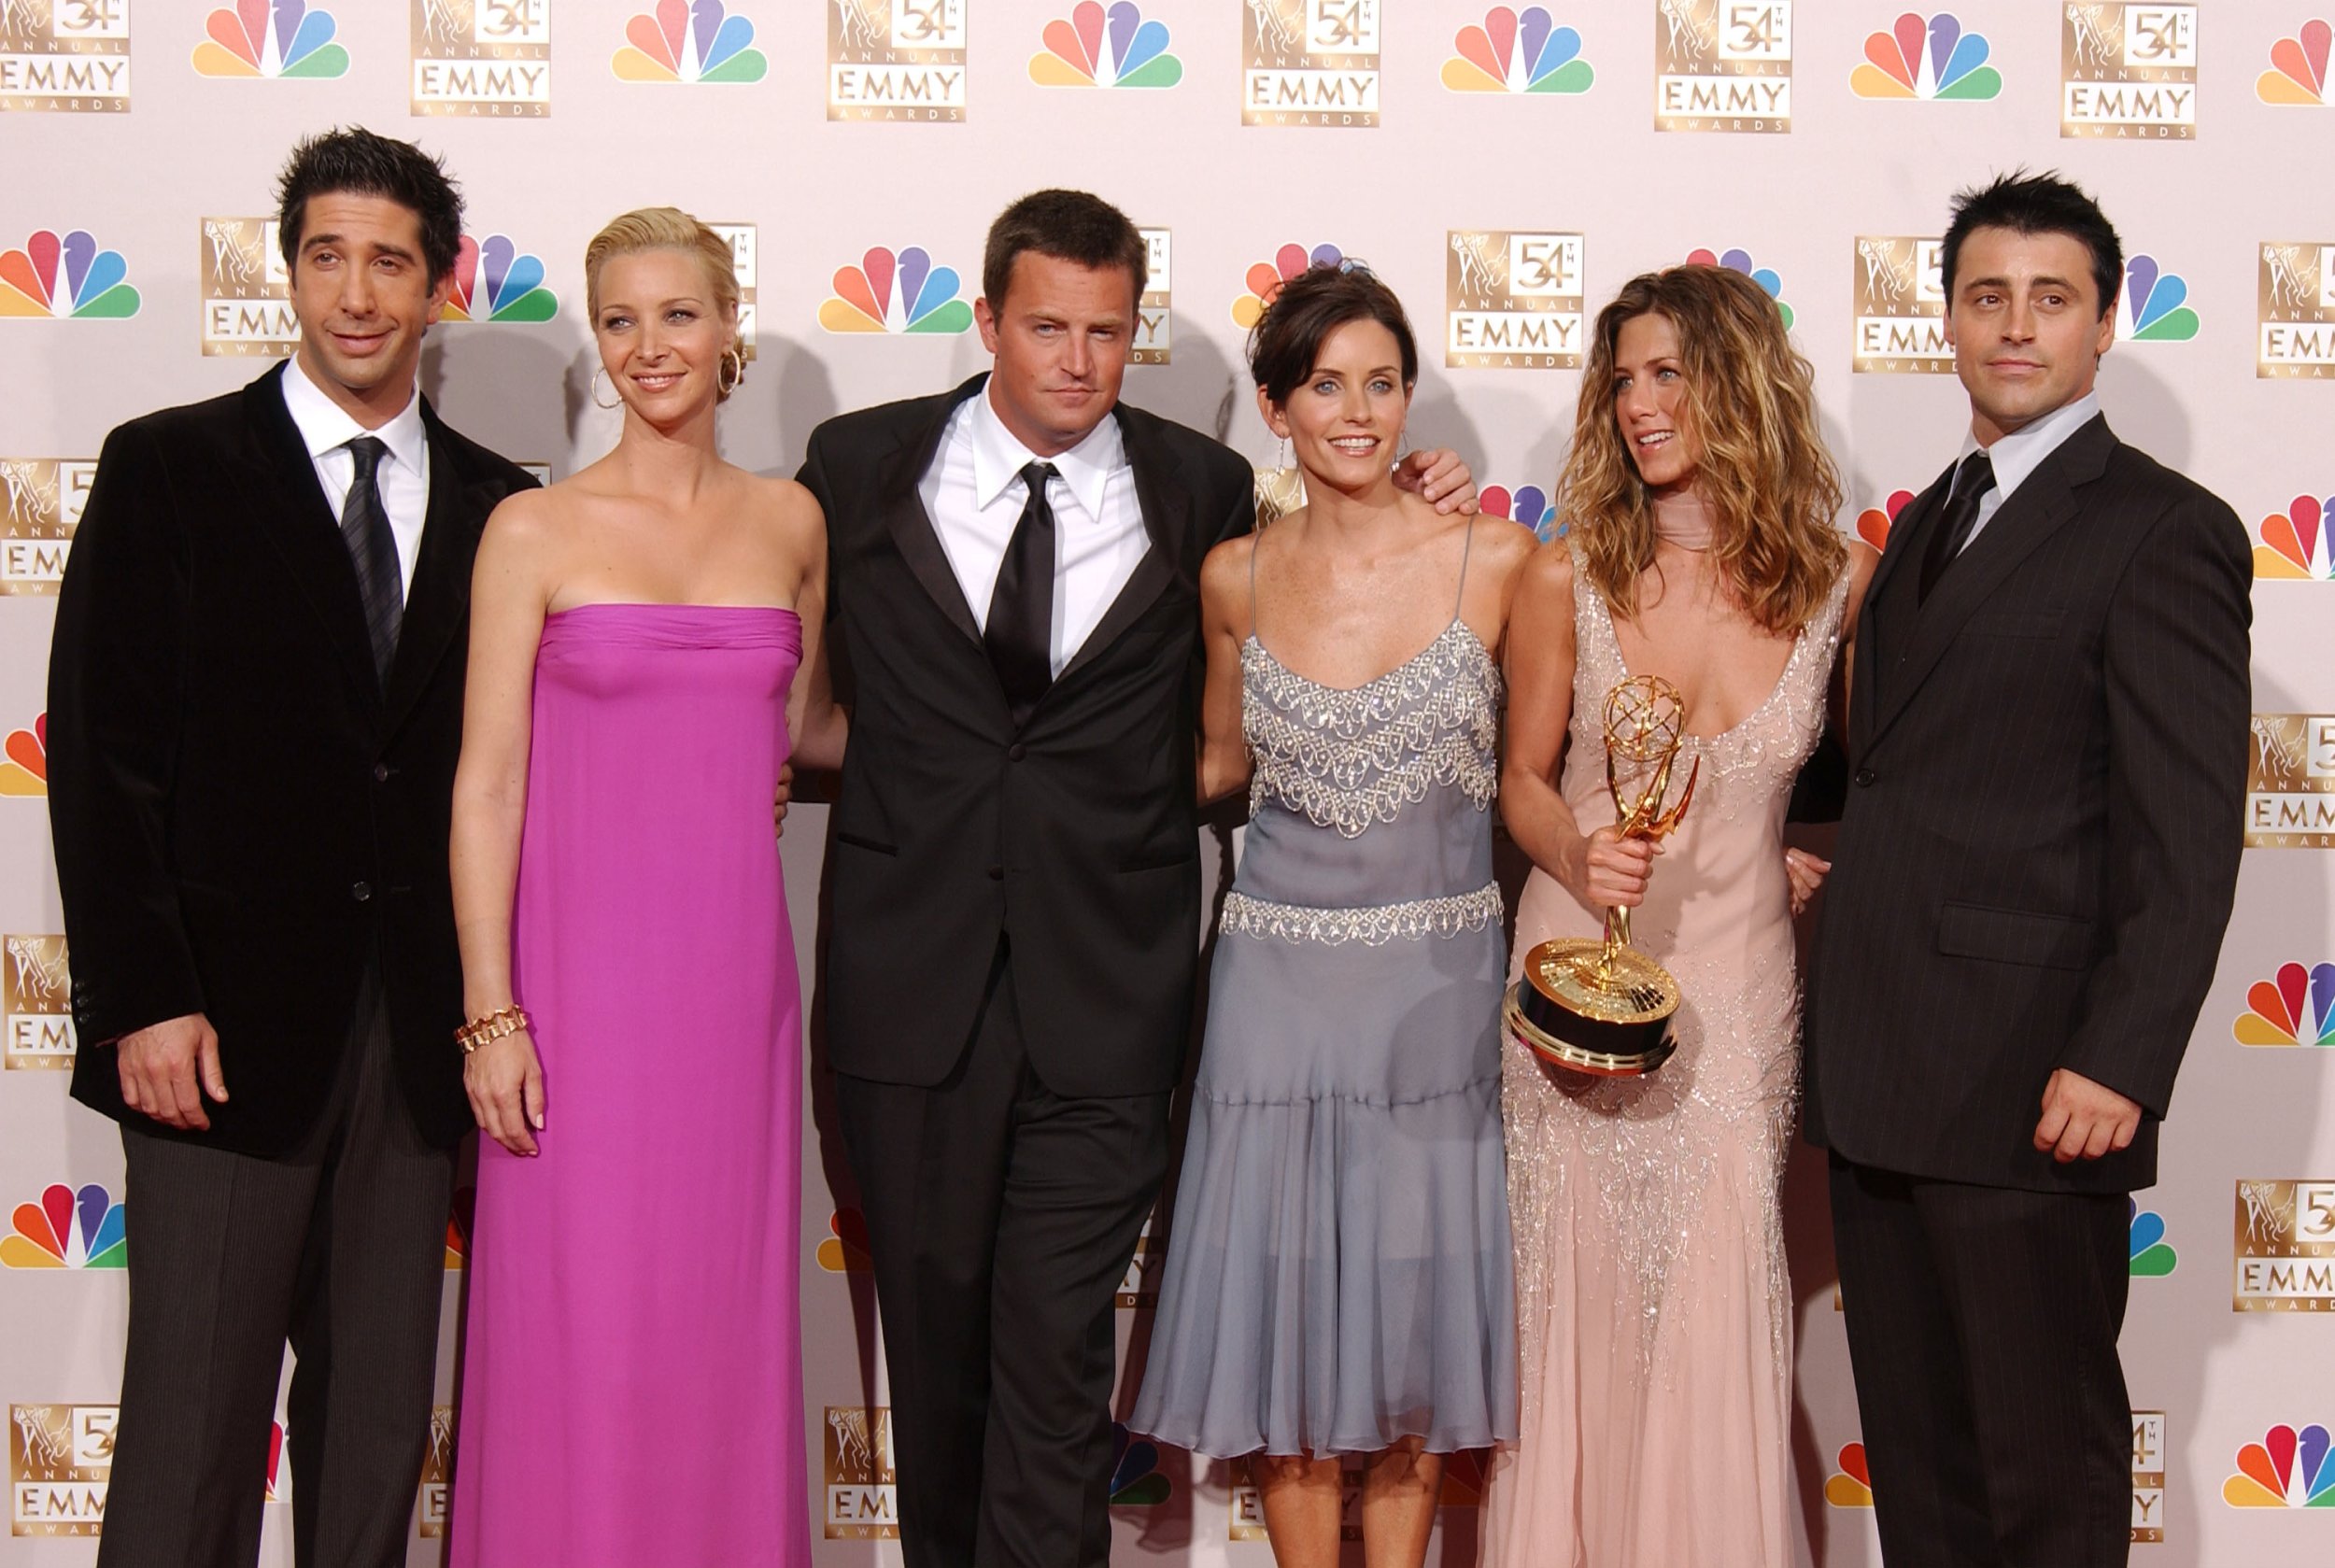 Friends 25th Anniversary Photo Gallery - TV Guide